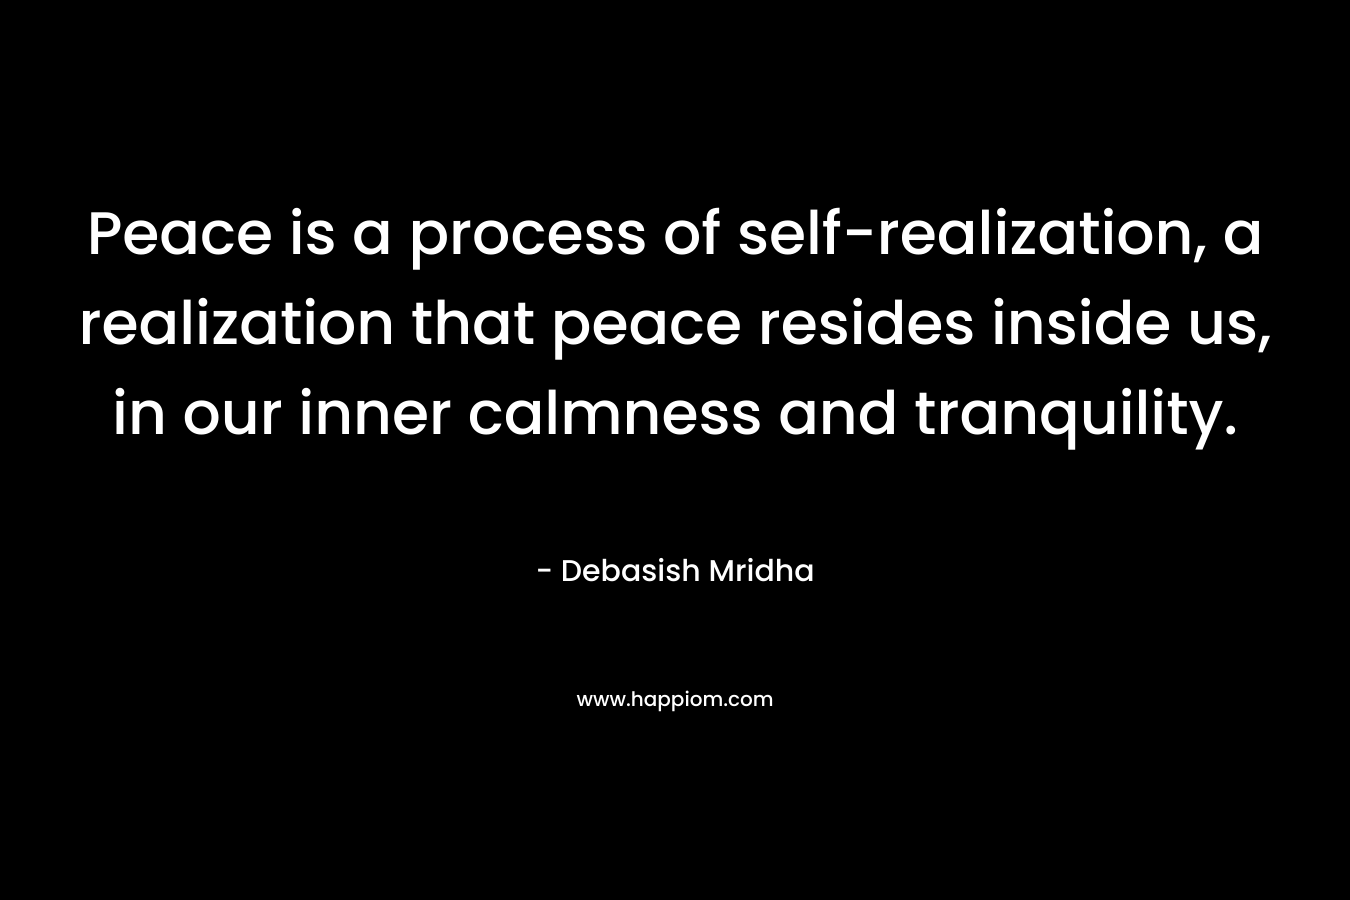 Peace is a process of self-realization, a realization that peace resides inside us, in our inner calmness and tranquility. – Debasish Mridha